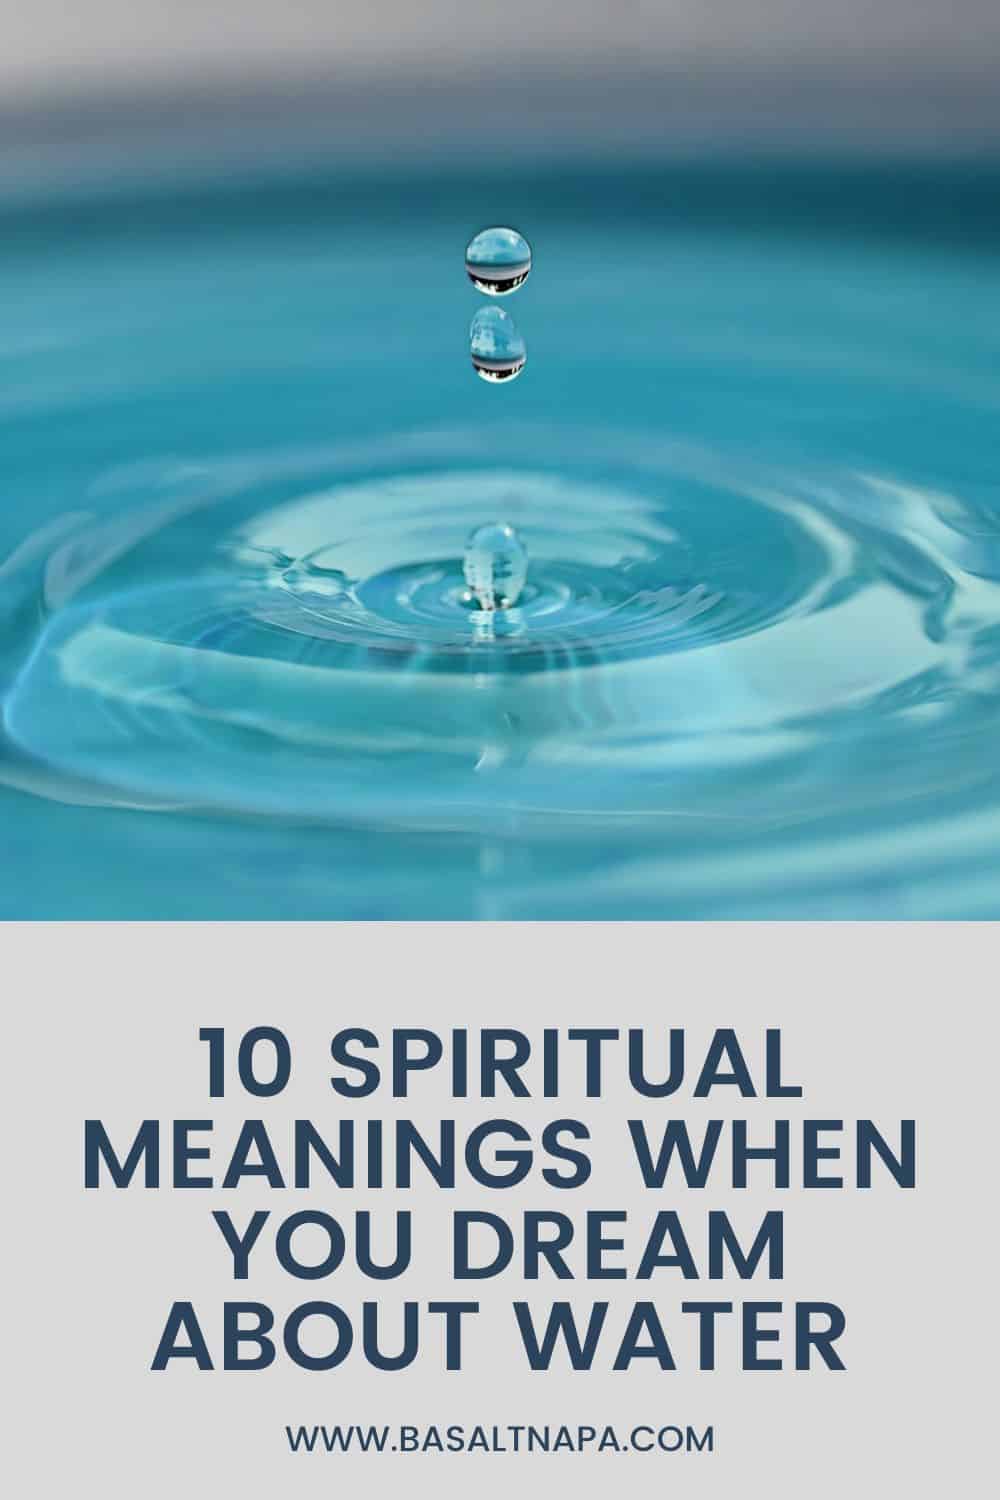 Spiritual Meanings When You Dream About Water